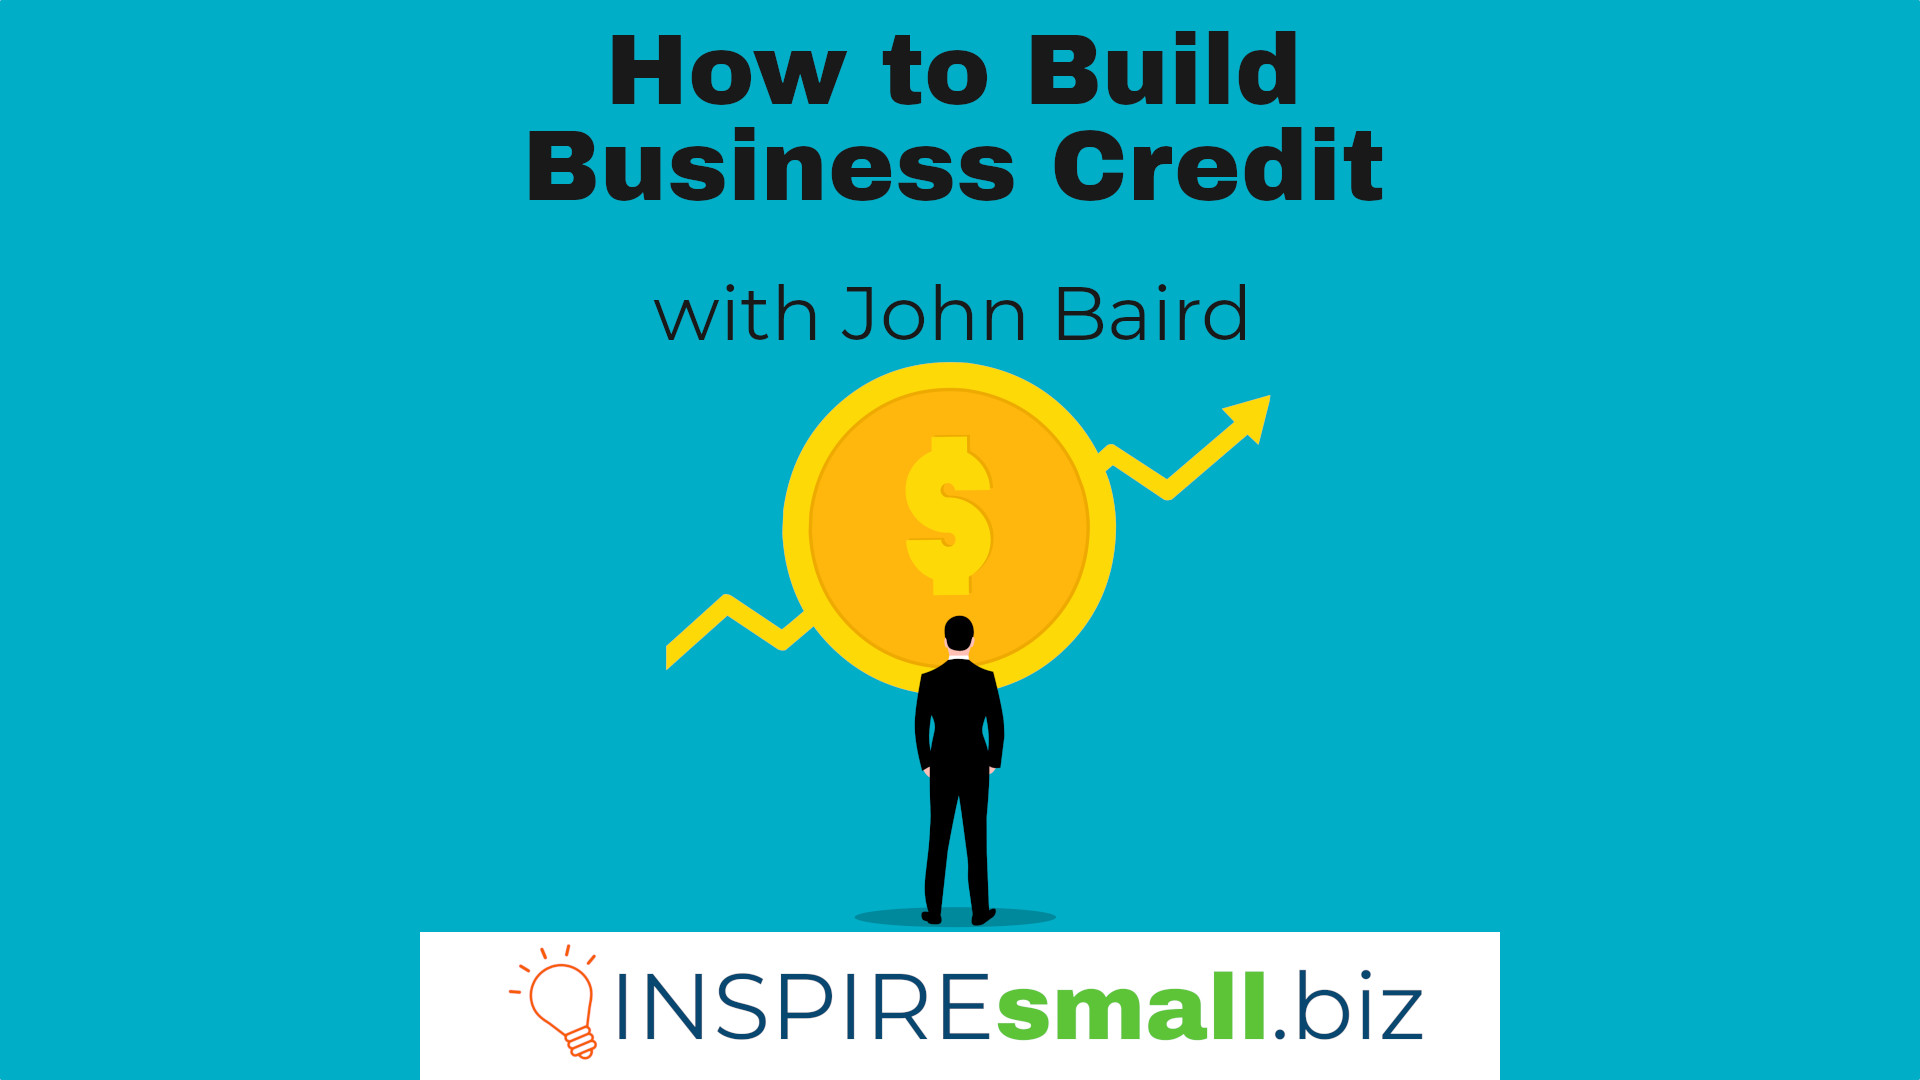 How to Build Business Credit with John Baird - Monday Networking on Zoom with INSPIREsmall.biz